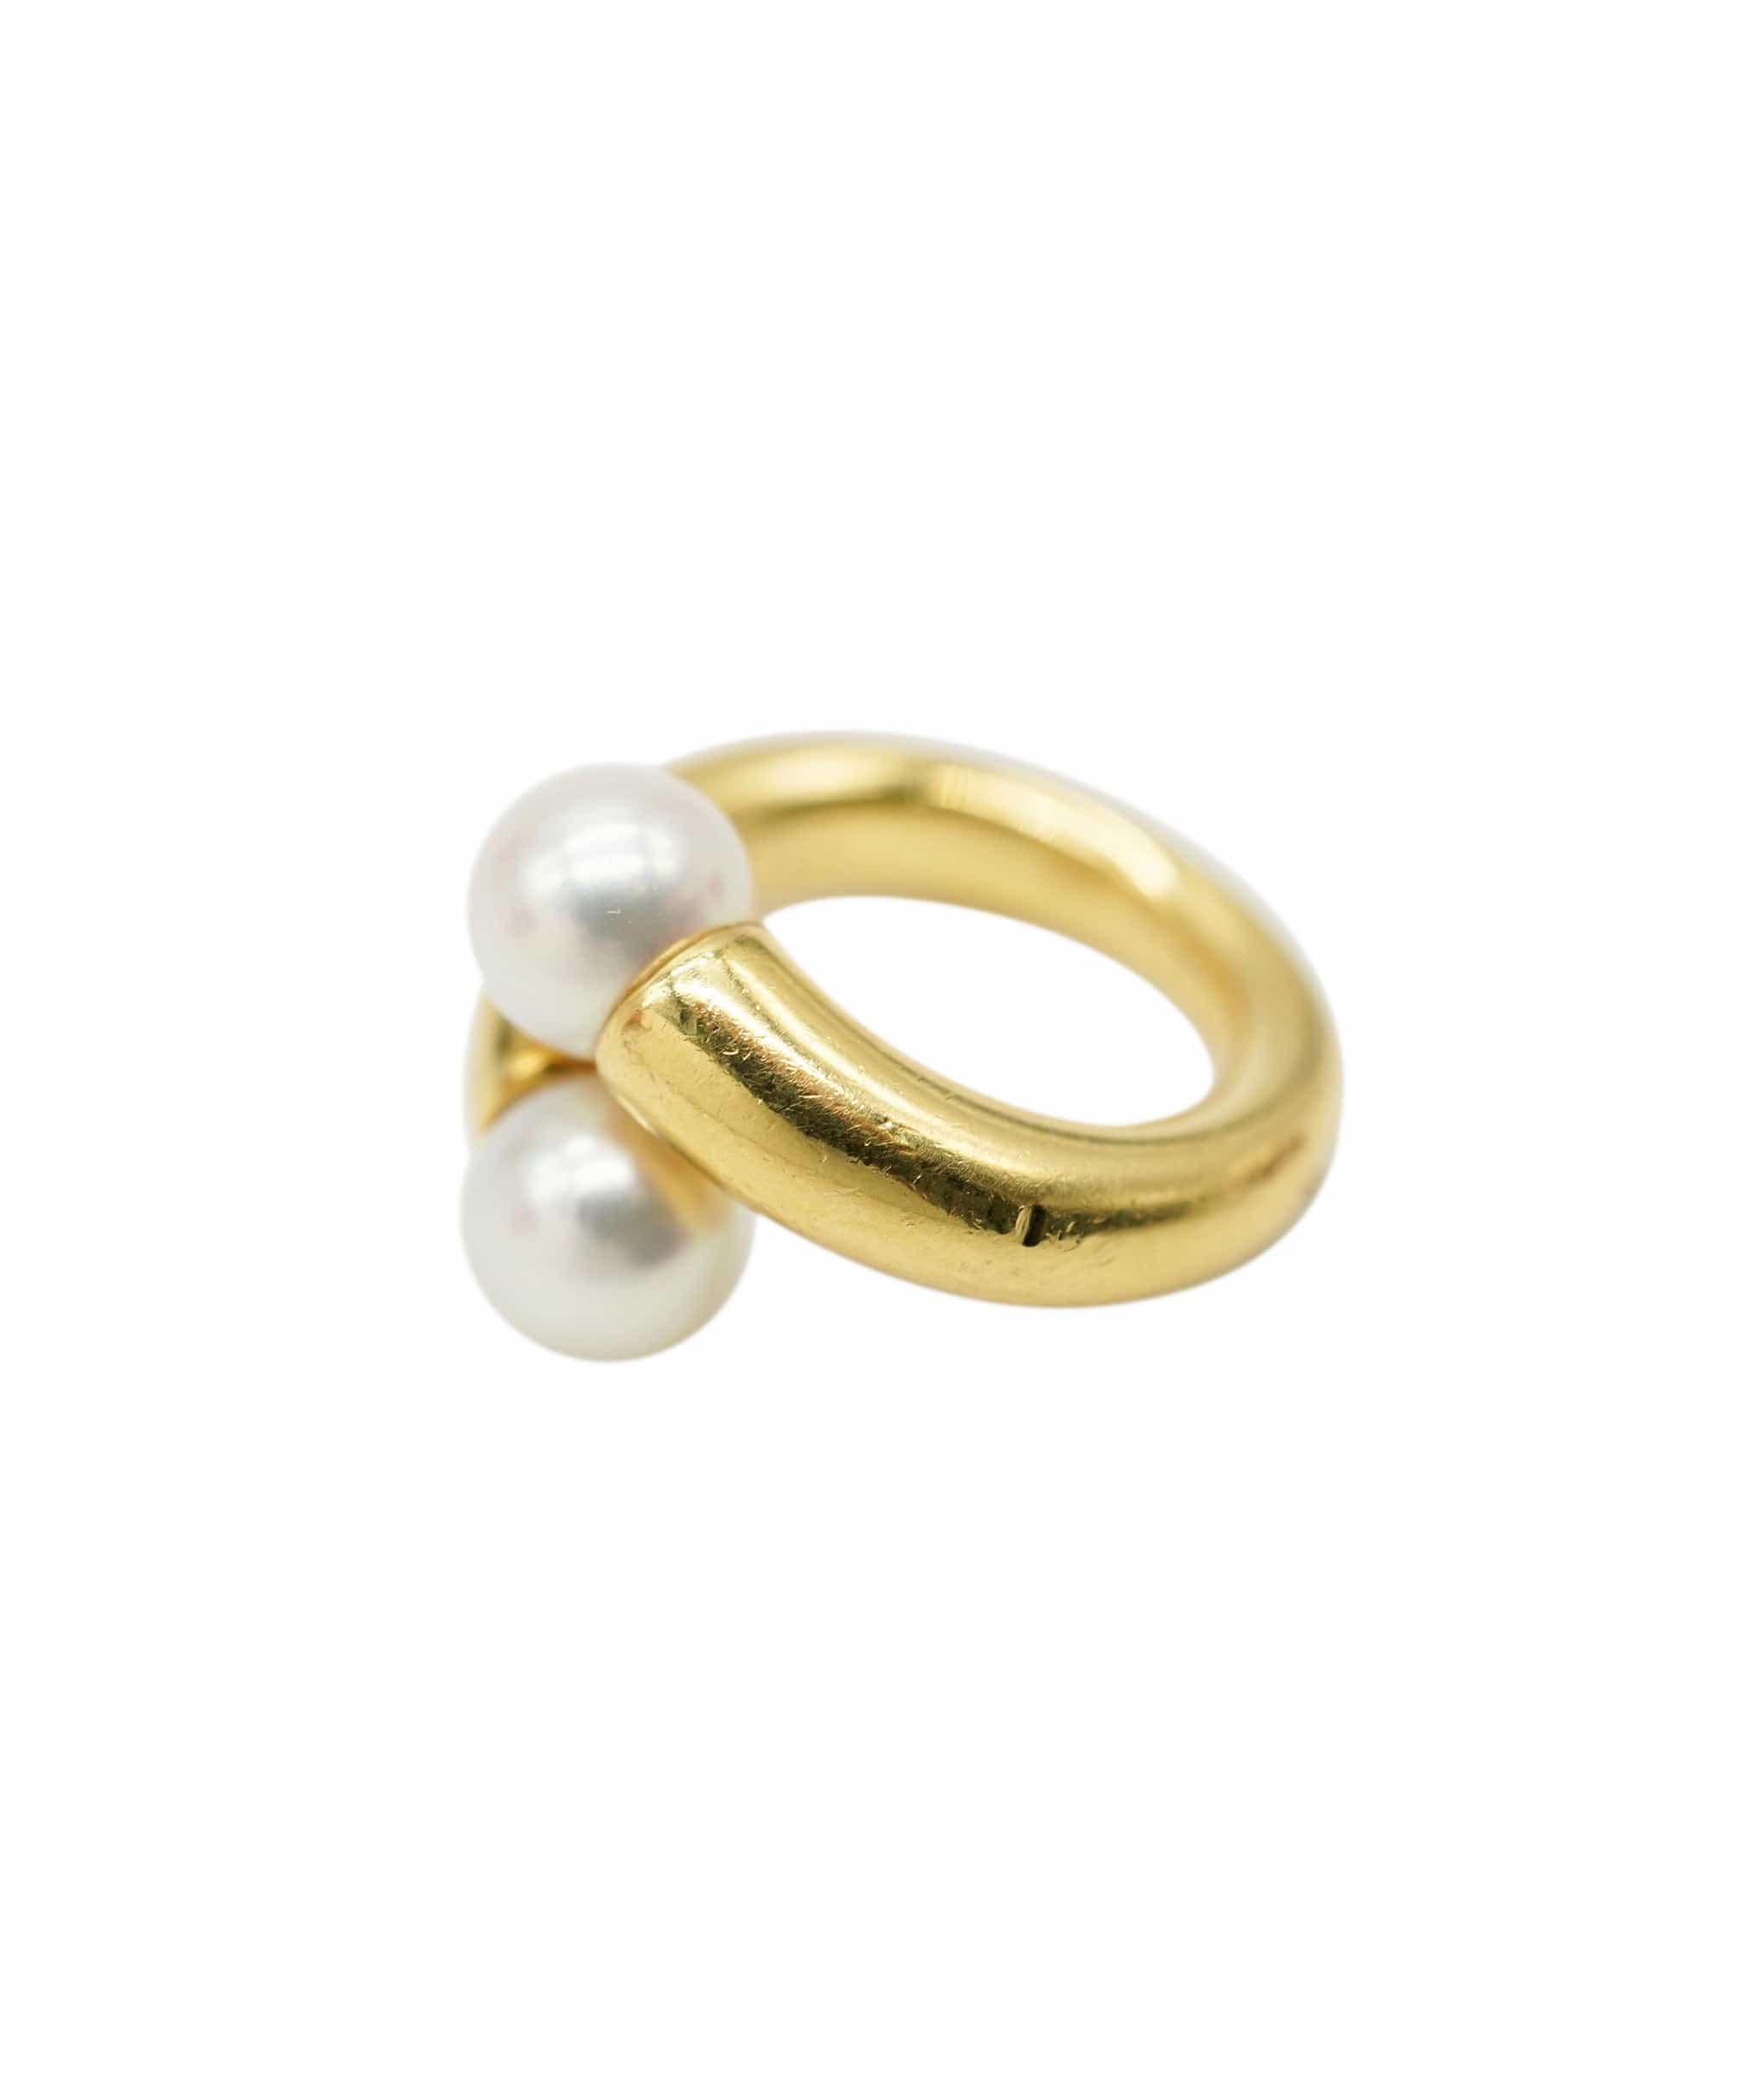 Cartier Cartier cultured pearl toi et moi yellow gold ring AHC1916